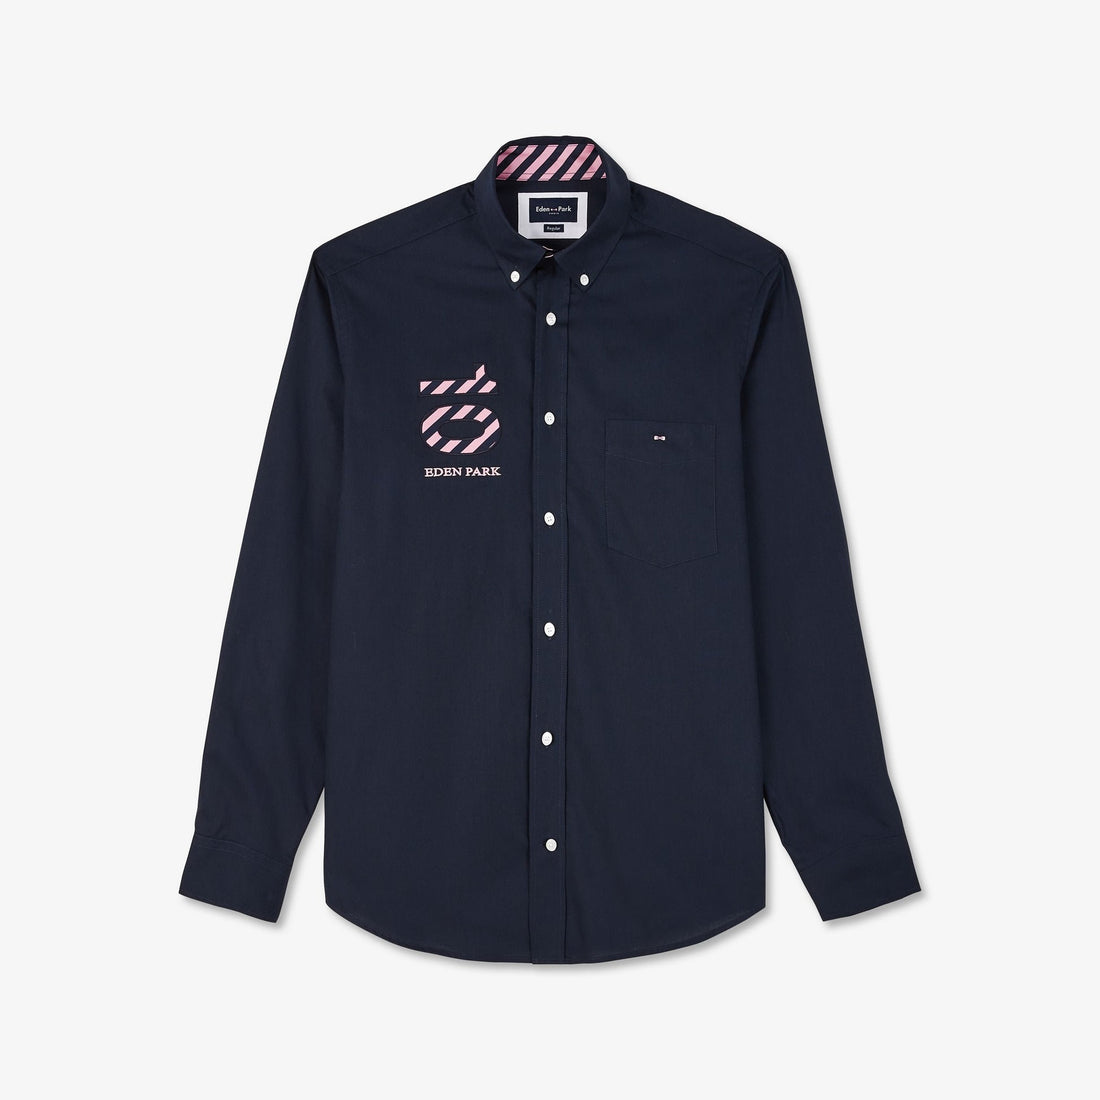 Dark Blue Shirt With No. 10 Embroidery_H23CHECL0002_BLF_02